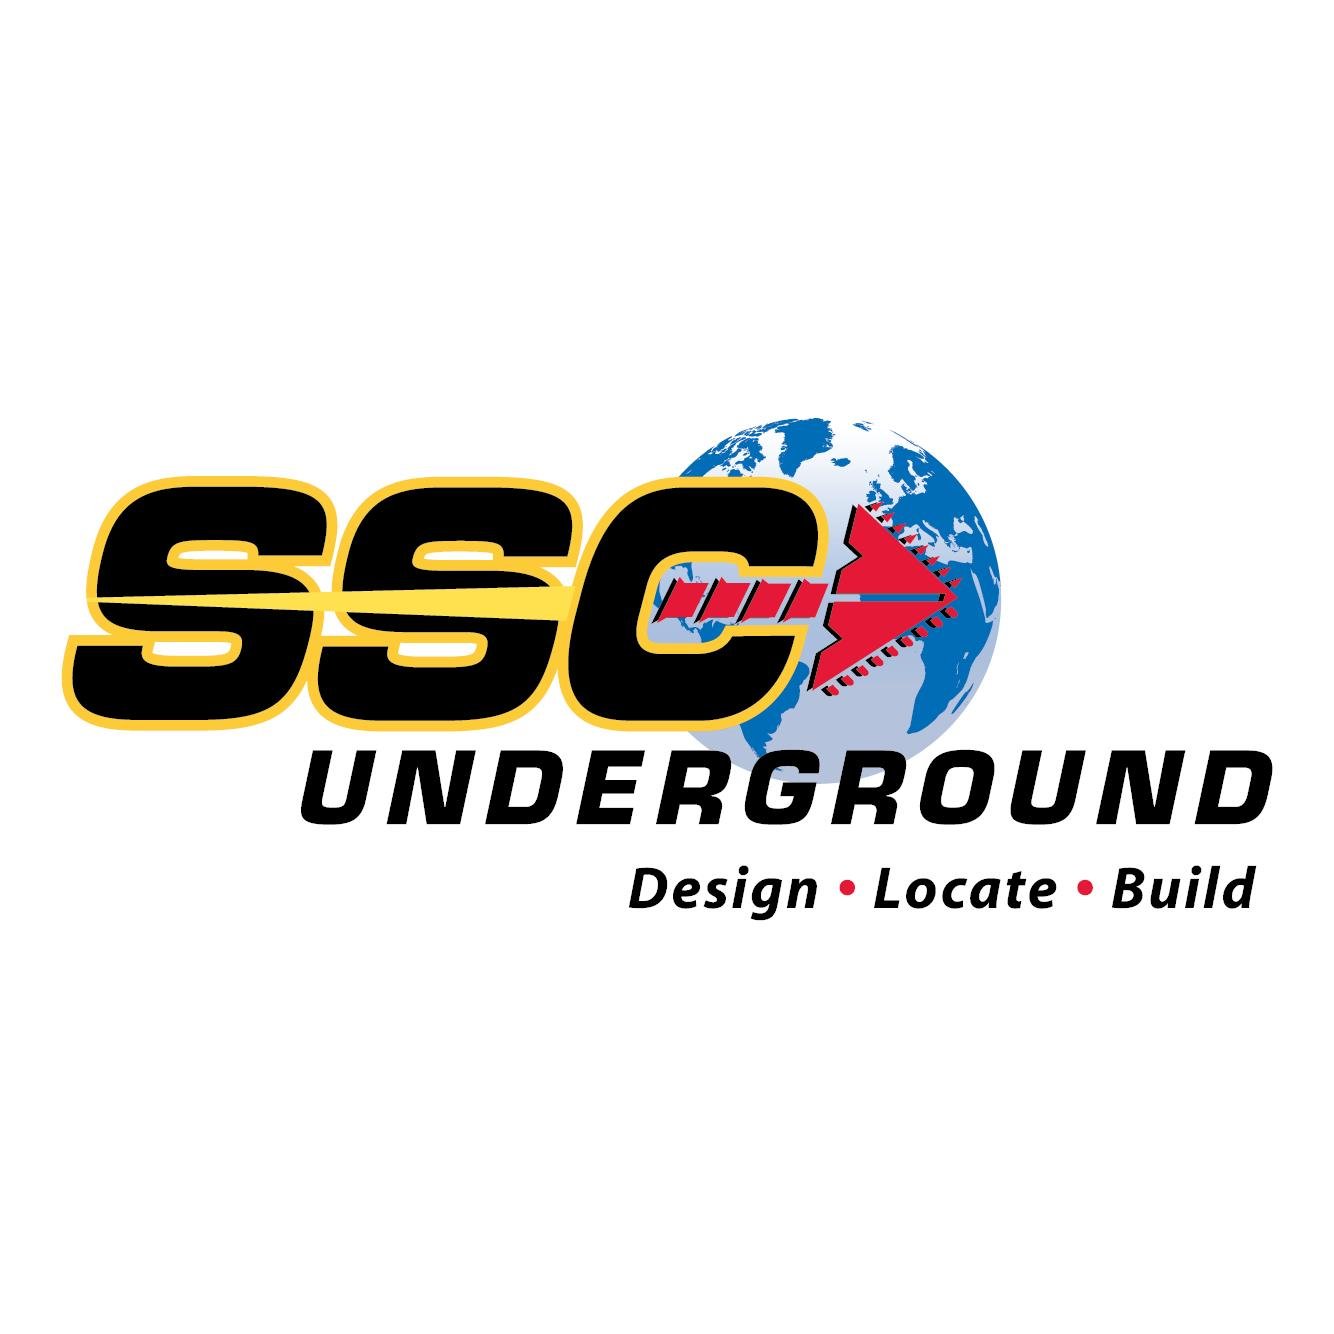 Underground construction company. Established 1969. Auger Earth Boring, Tunneling, Excavating, Vacuum Utility Locating. #Trenchless #Utilities #Construction